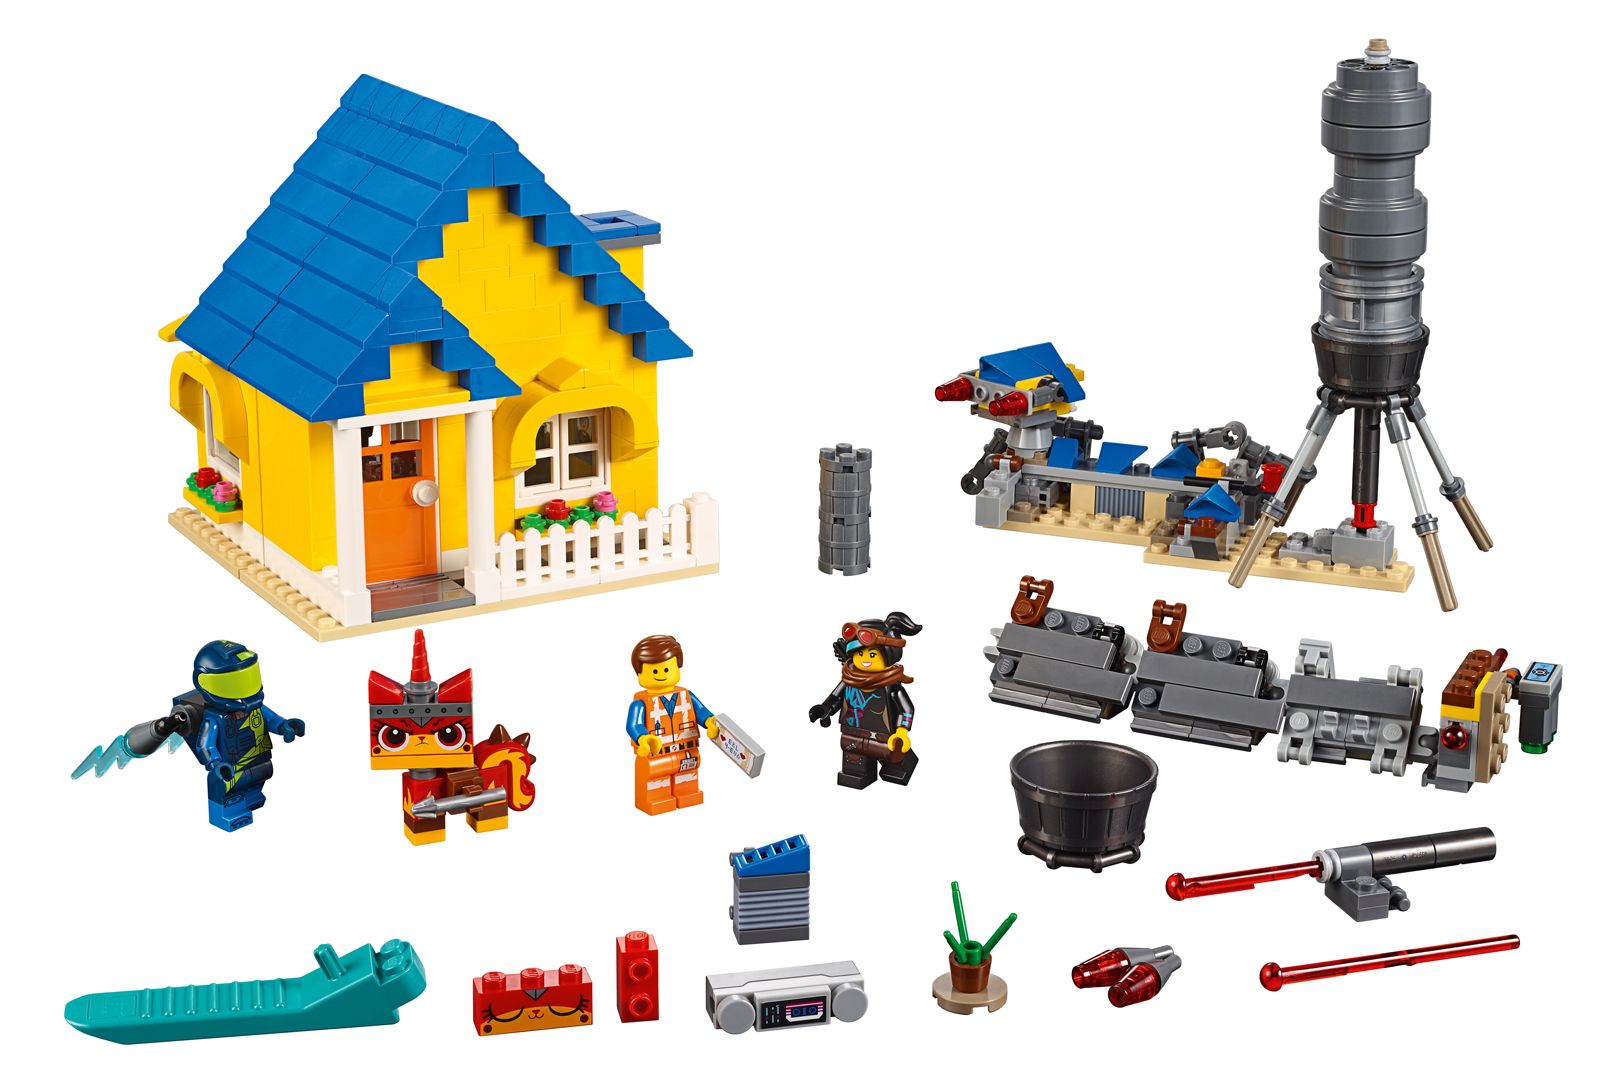 21 Lego sets from The Lego Movie 2 The Second Part - every set covered image 11